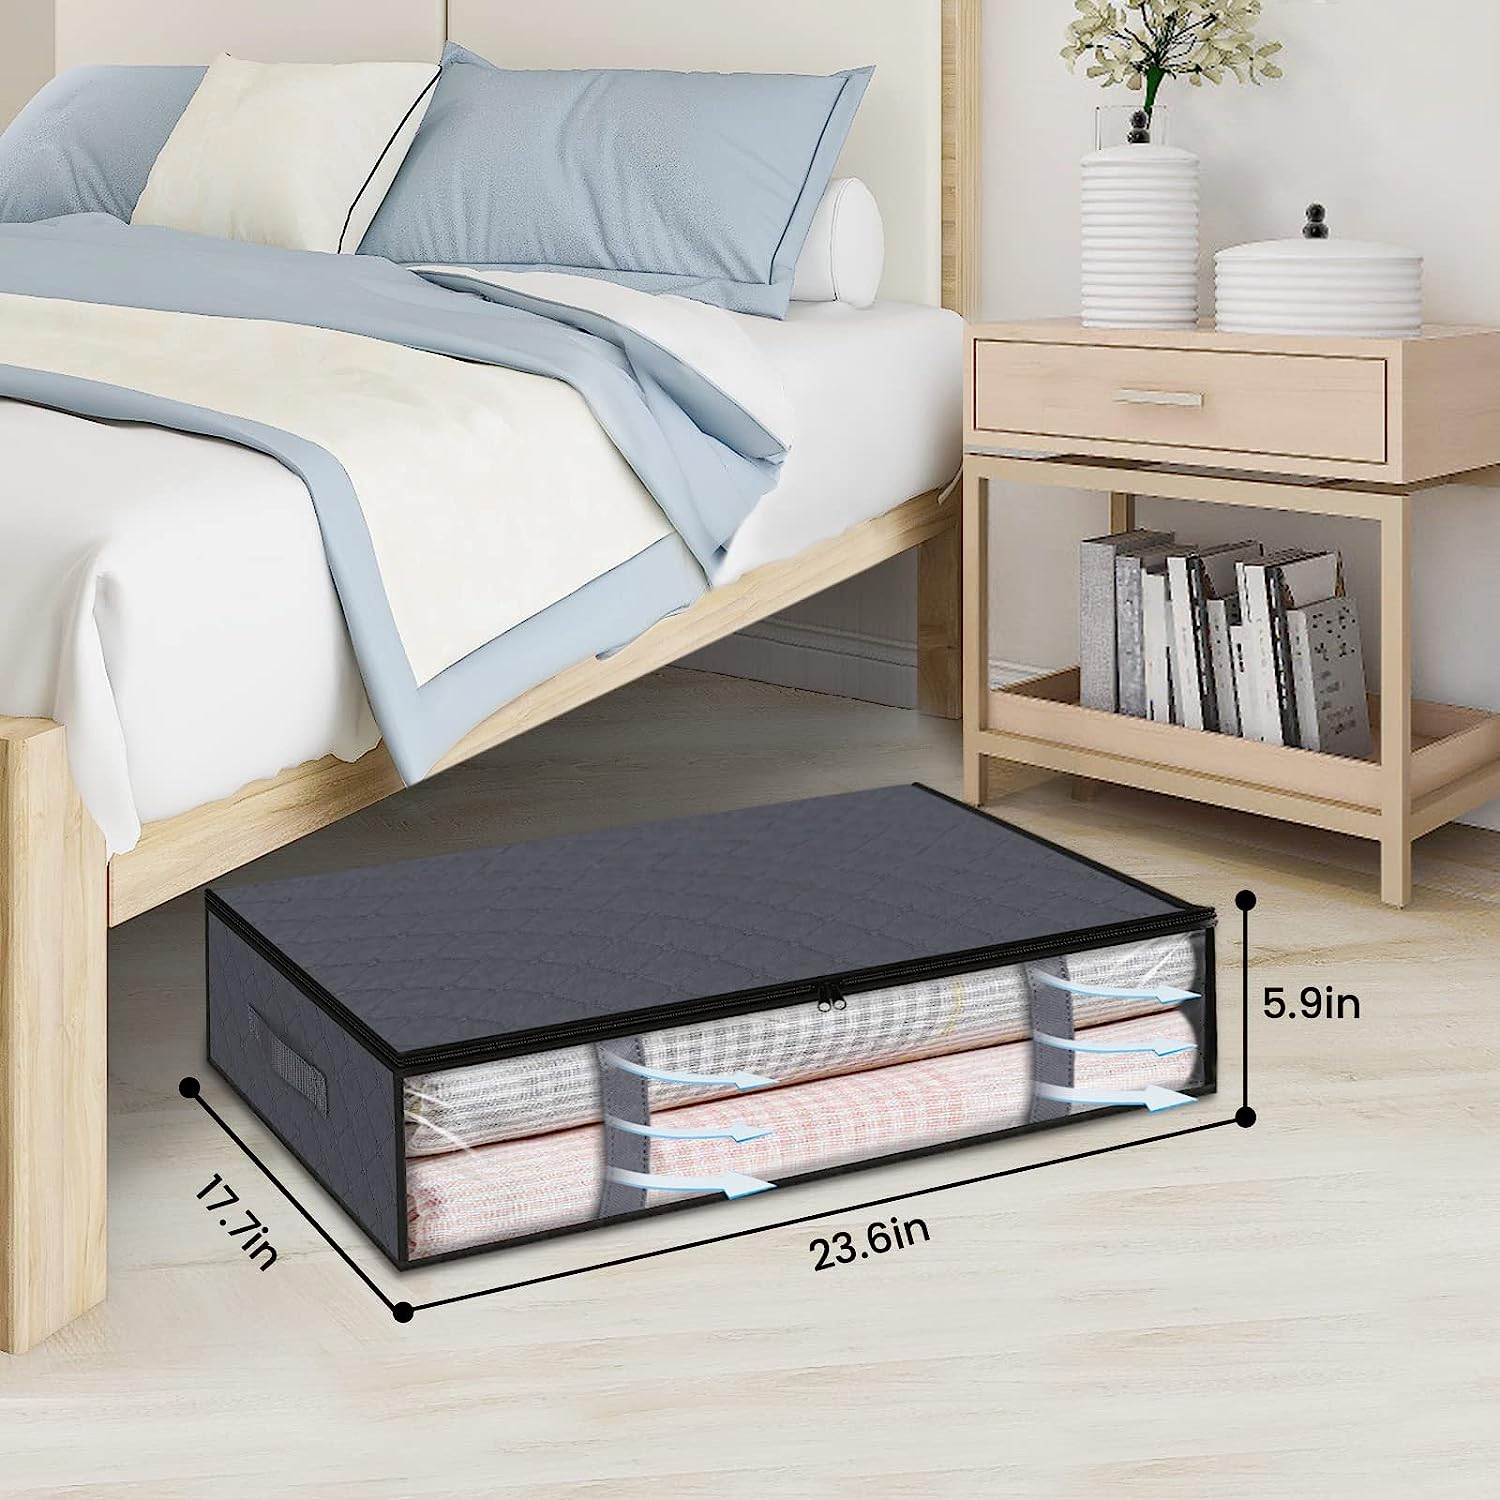 3 Packs Under Bed Storage Containers for Organizing